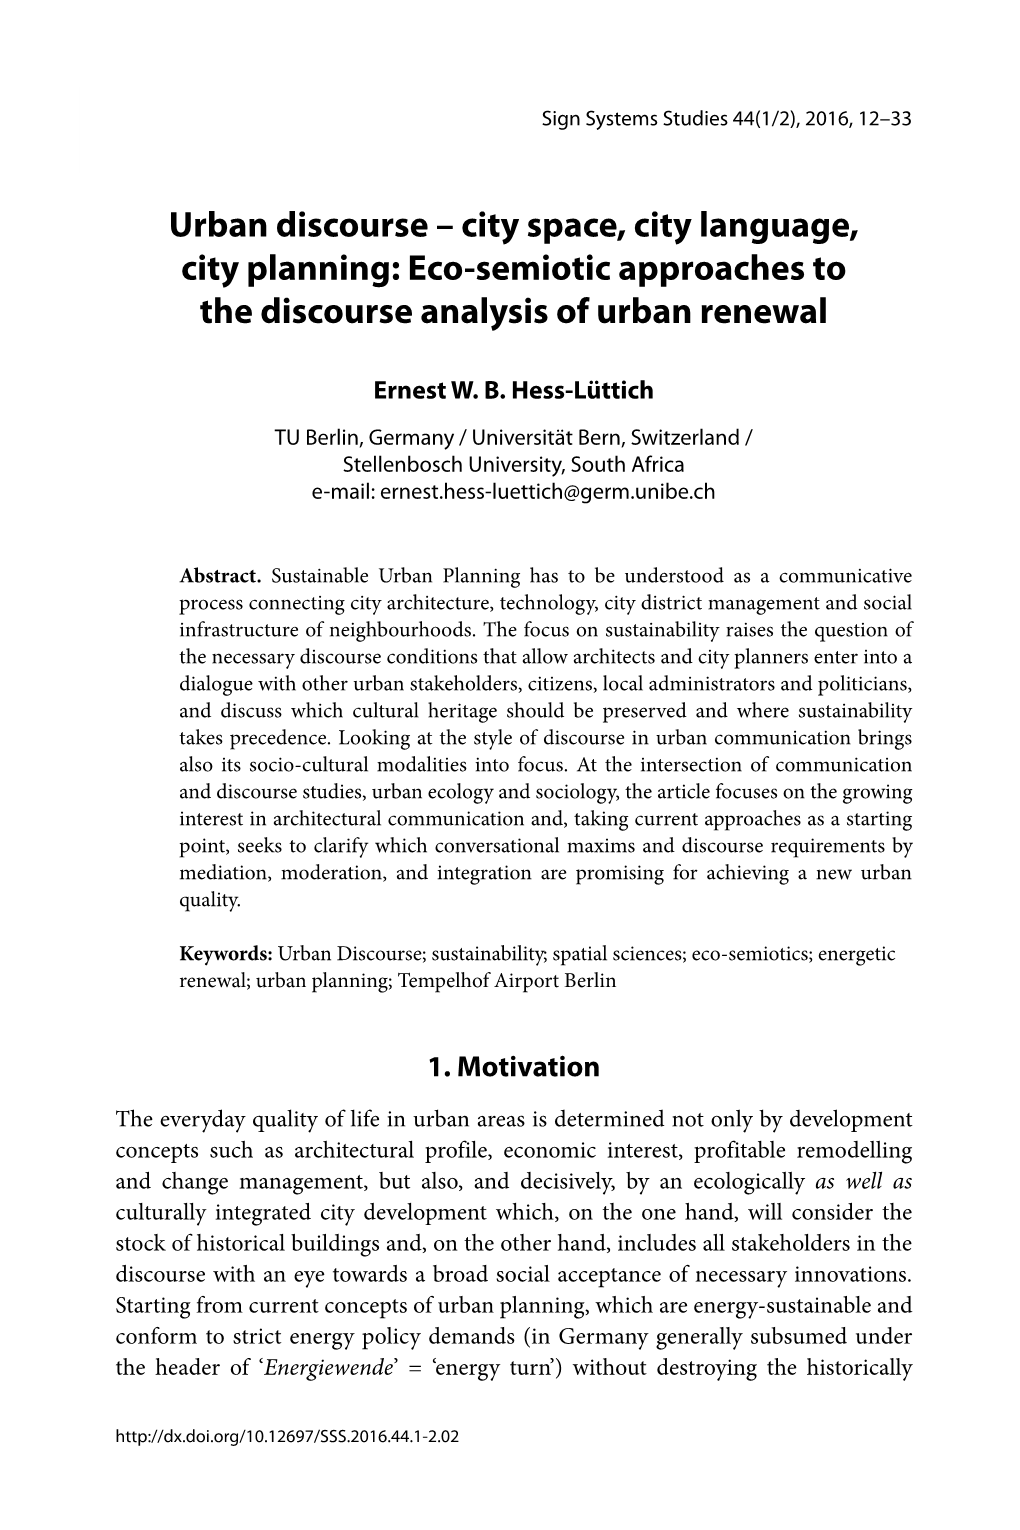 Urban Discourse – City Space, City Language, City Planning: Eco-Semiotic Approaches to the Discourse Analysis of Urban Renewal